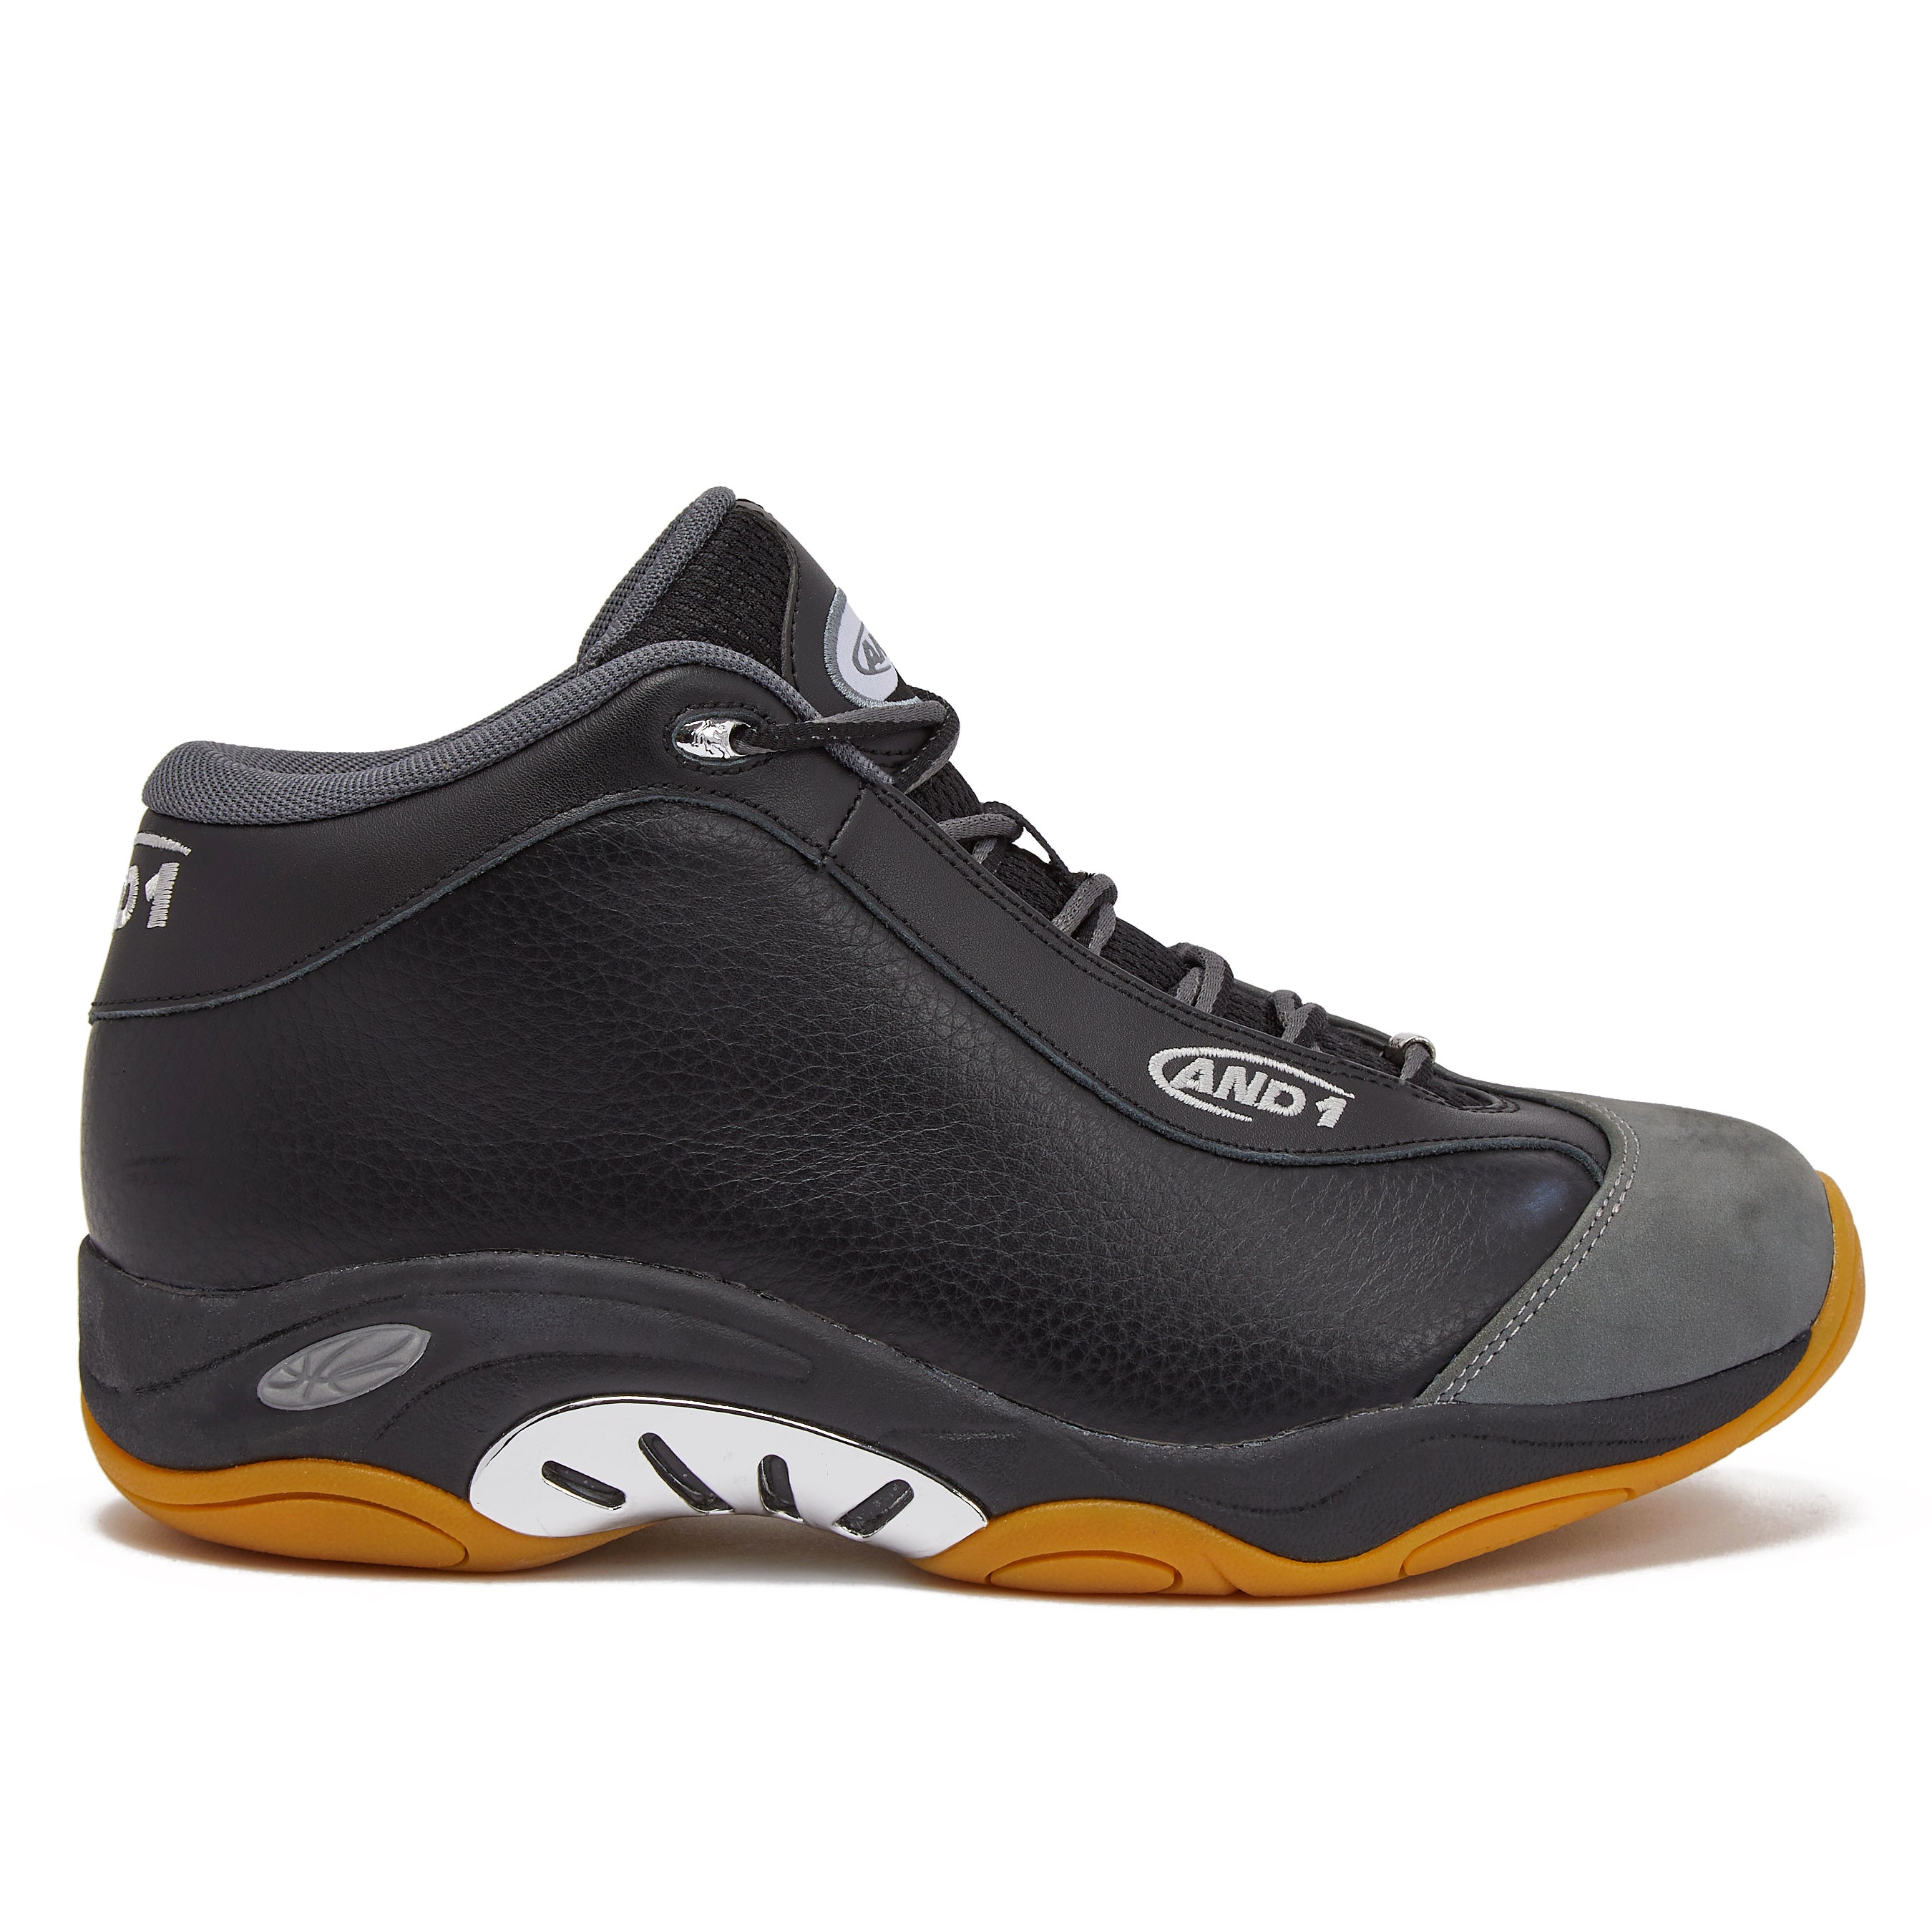 AND1 Mens Basketball Shoes | Indoor Outdoor Court Sneakers for Men